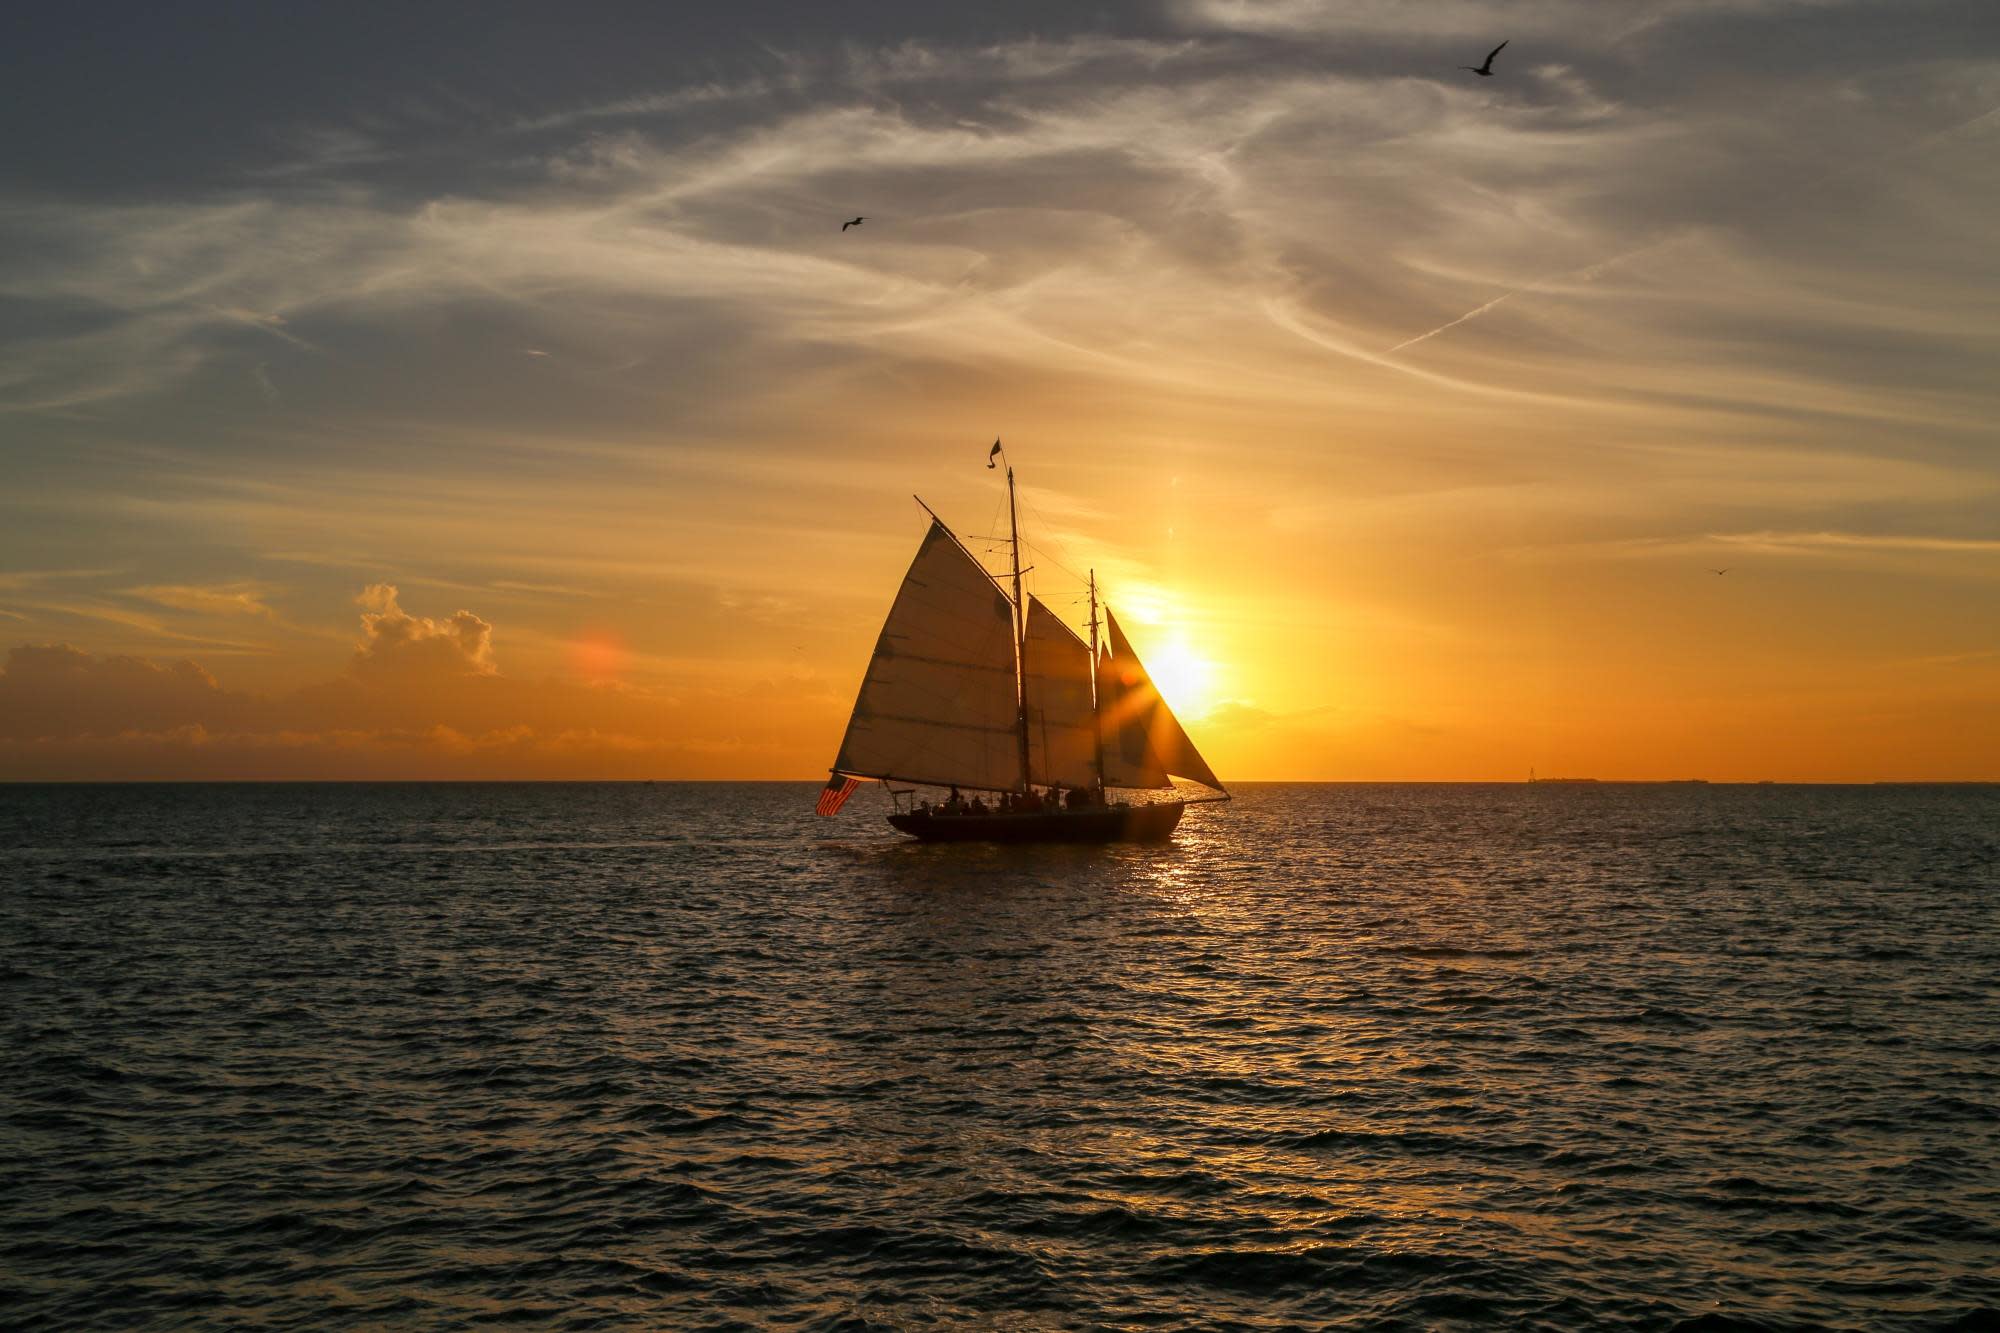 a-romantic-getaway-to-puerto-rico-best-places-and-things-to-do-sunset-cruise